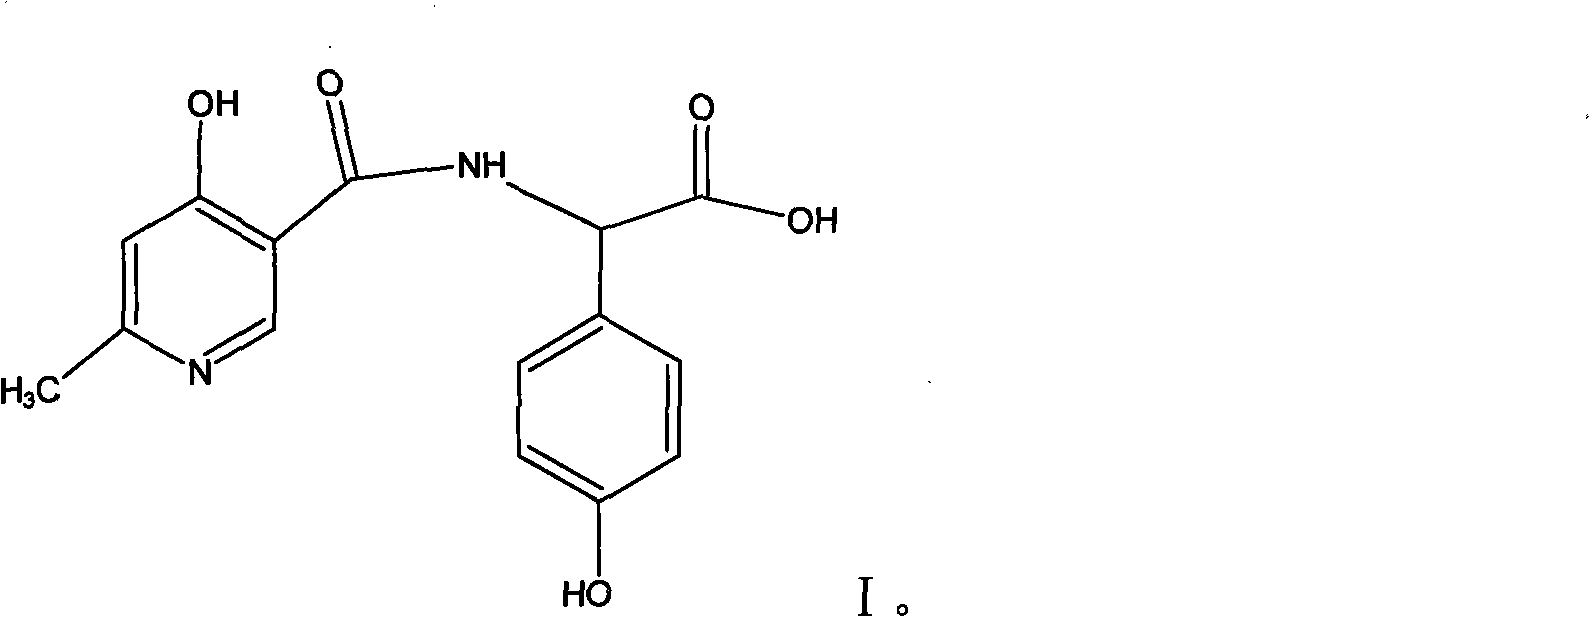 Process for synthesizing D-alpha-(6-methyl-4-hydroxyl nicotinamide base)p-hydroxyphenylacetic acid